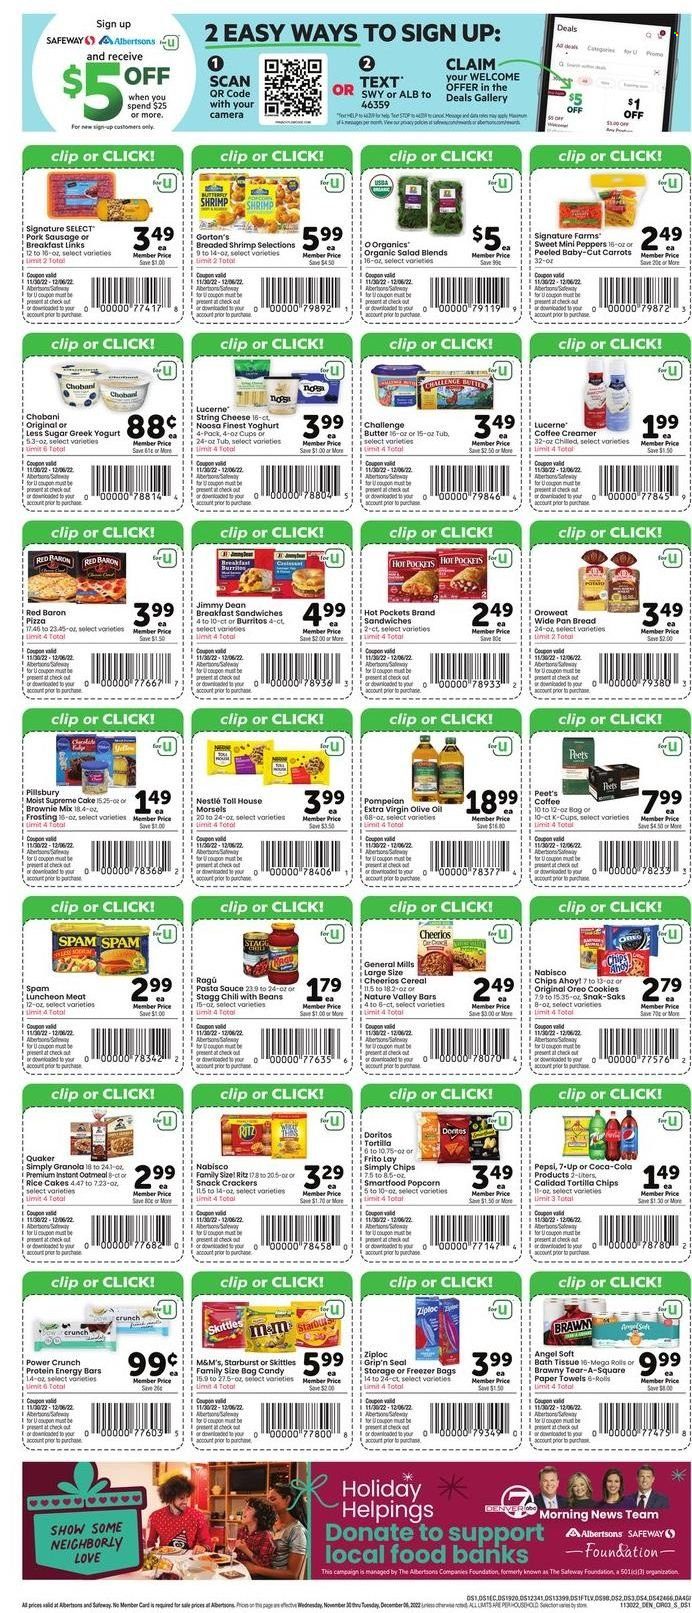 thumbnail - Safeway Flyer - 11/30/2022 - 12/06/2022 - Sales products - bread, carrots, salad, peppers, shrimps, Gorton's, hot pocket, pizza, pasta sauce, sauce, Pillsbury, burrito, Quaker, Jimmy Dean, ragú pasta, sausage, pork sausage, Spam, lunch meat, string cheese, greek yoghurt, Oreo, yoghurt, Chobani, butter, creamer, Red Baron, cookies, Nestlé, snack, M&M's, crackers, Skittles, Chips Ahoy!, Starburst, RITZ, Doritos, tortilla chips, chips, Smartfood, popcorn, frosting, oatmeal, cereals, granola, Cheerios, energy bar, Nature Valley, rice, ragu, extra virgin olive oil, olive oil, oil, Coca-Cola, Pepsi, 7UP, coffee capsules, K-Cups, bath tissue, kitchen towels, paper towels, Ziploc, pan, freezer bag. Page 3.